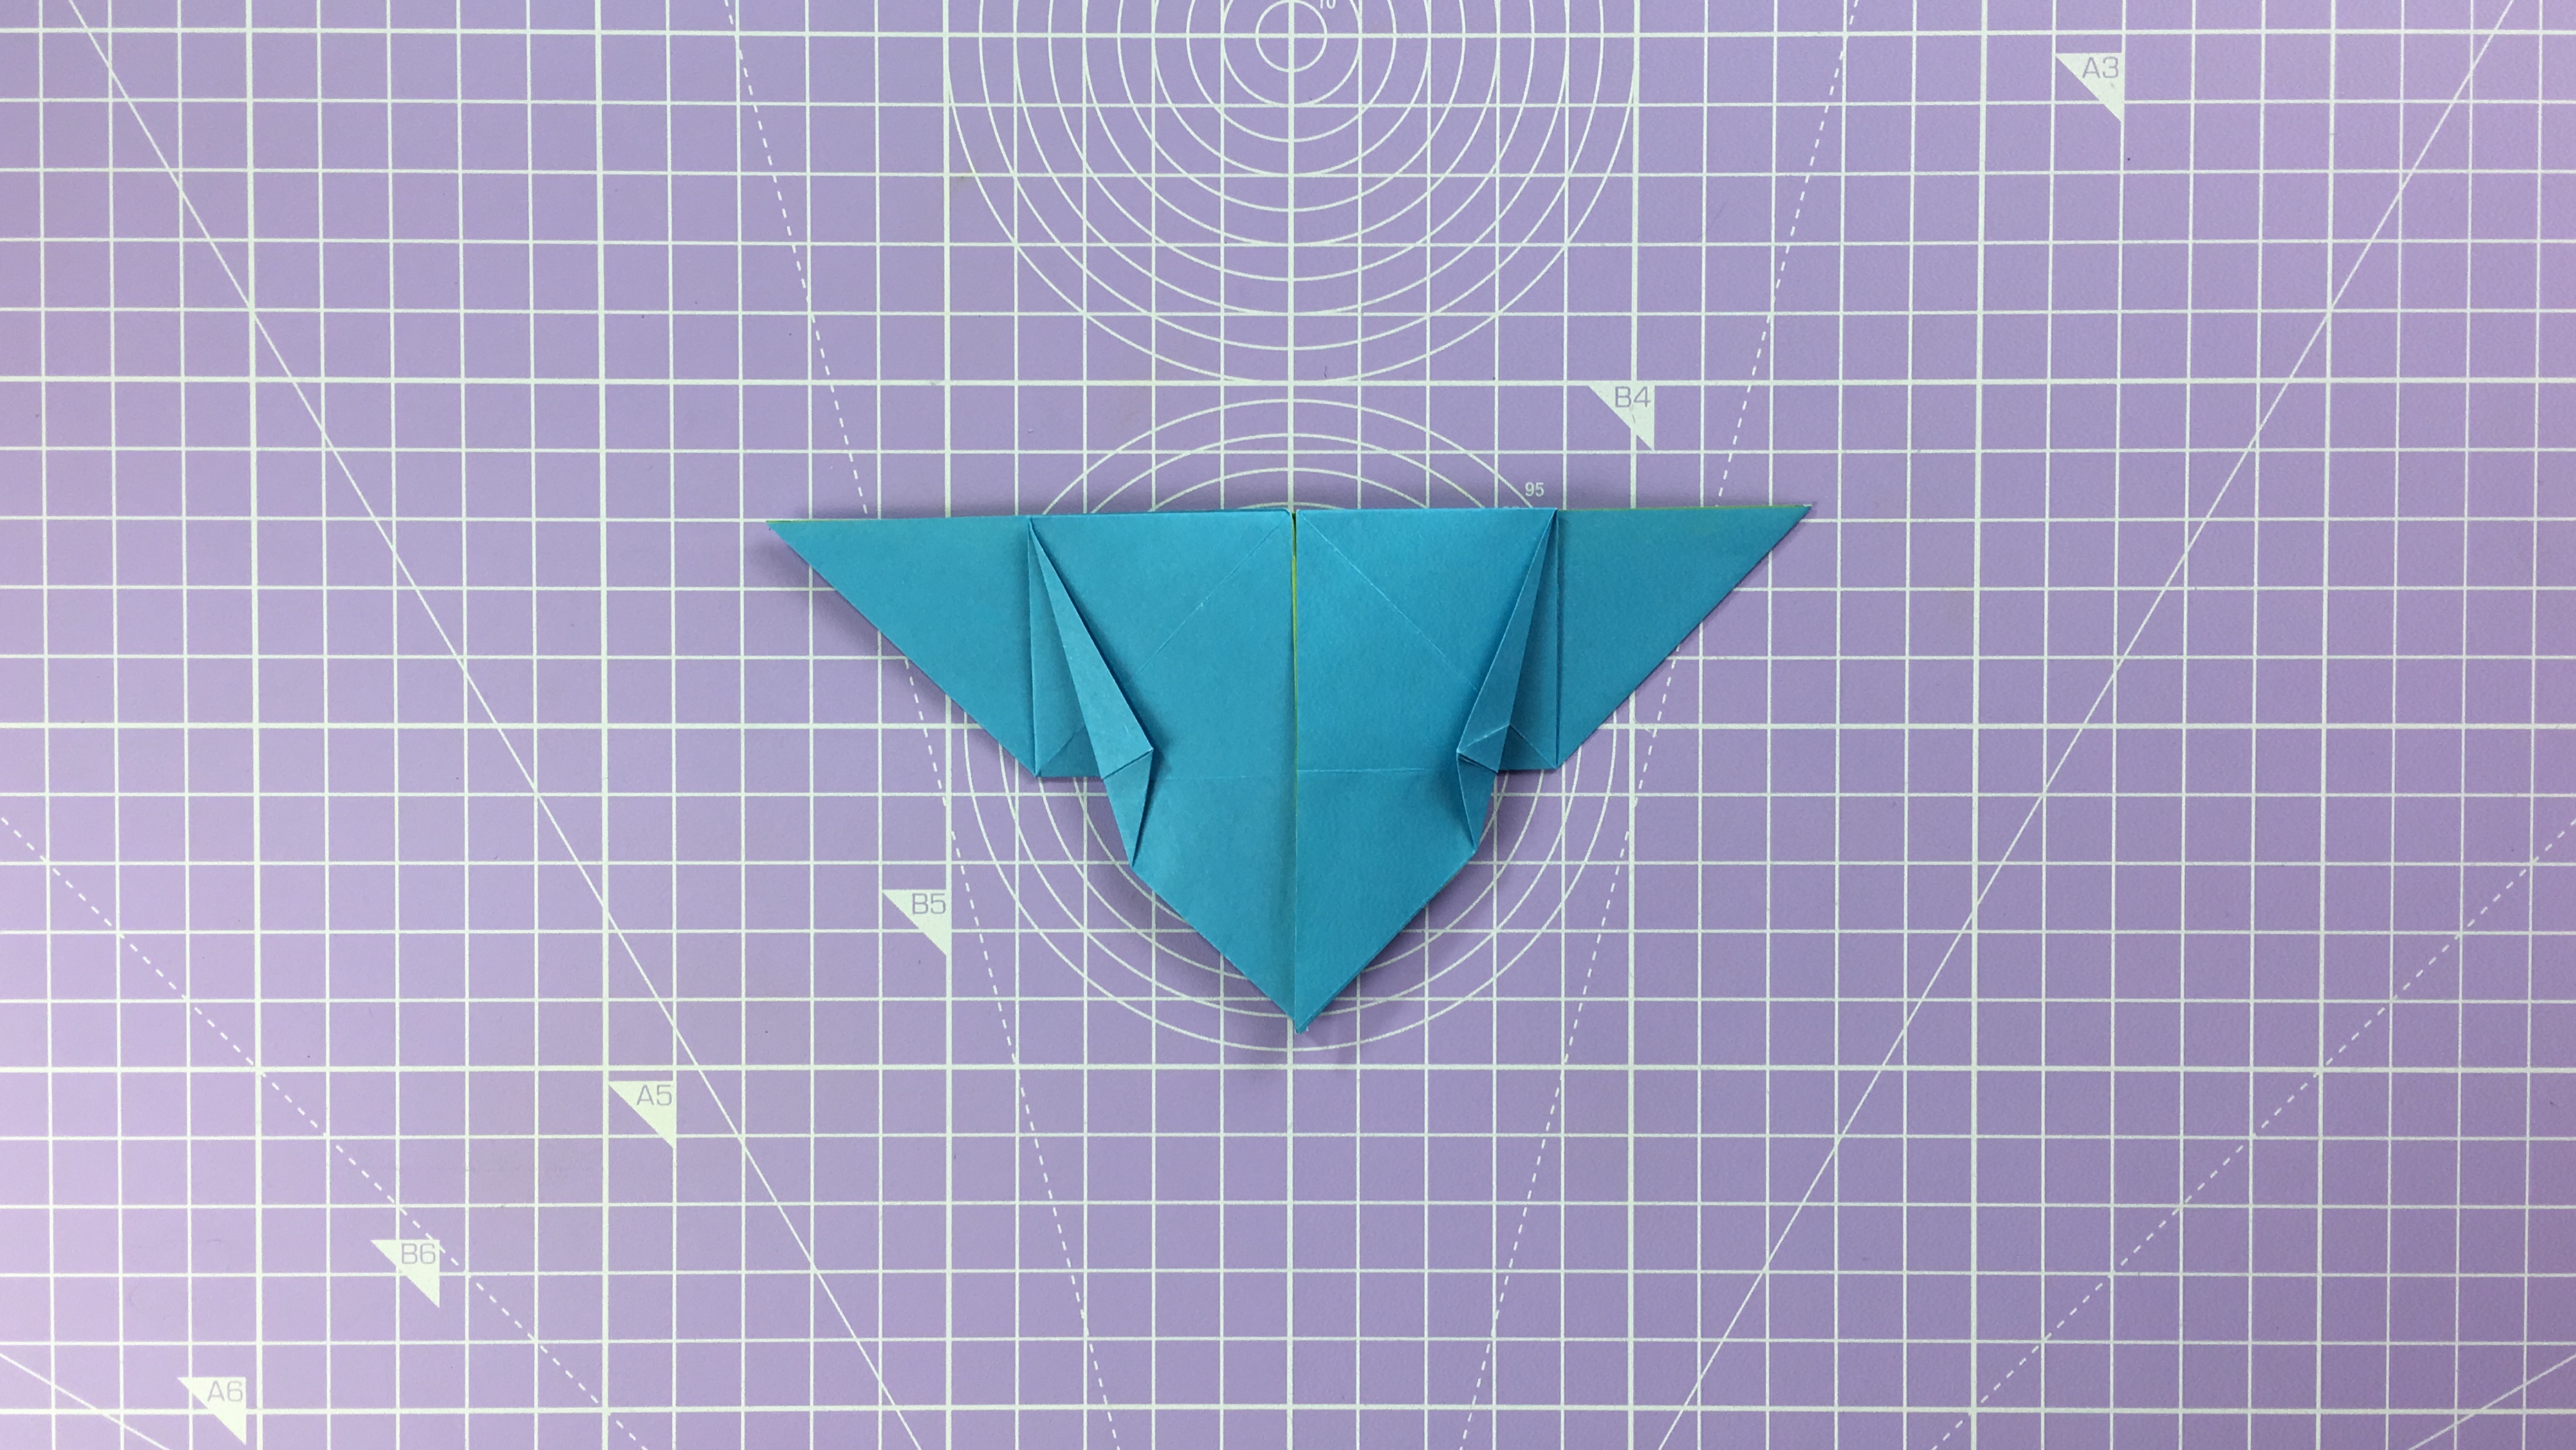 How to make an origami butterfly - step 13b